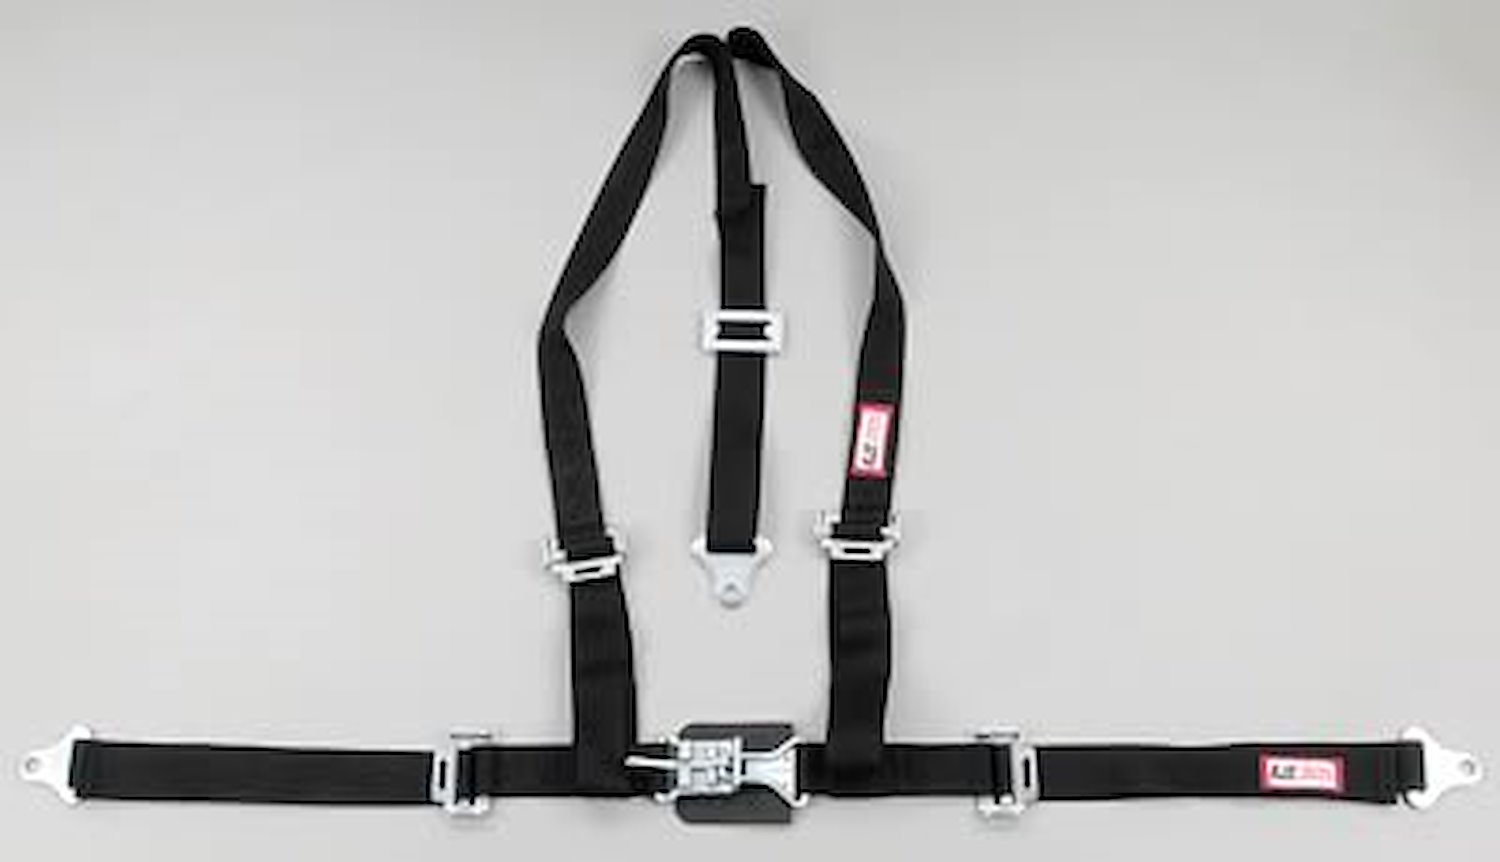 NON-SFI L&L HARNESS 3 PULL DOWN Lap BELT SEWN IN 2 S.H. Y FLOOR Mount w/STERNUM STRAP ALL WRAP ENDS GRAY